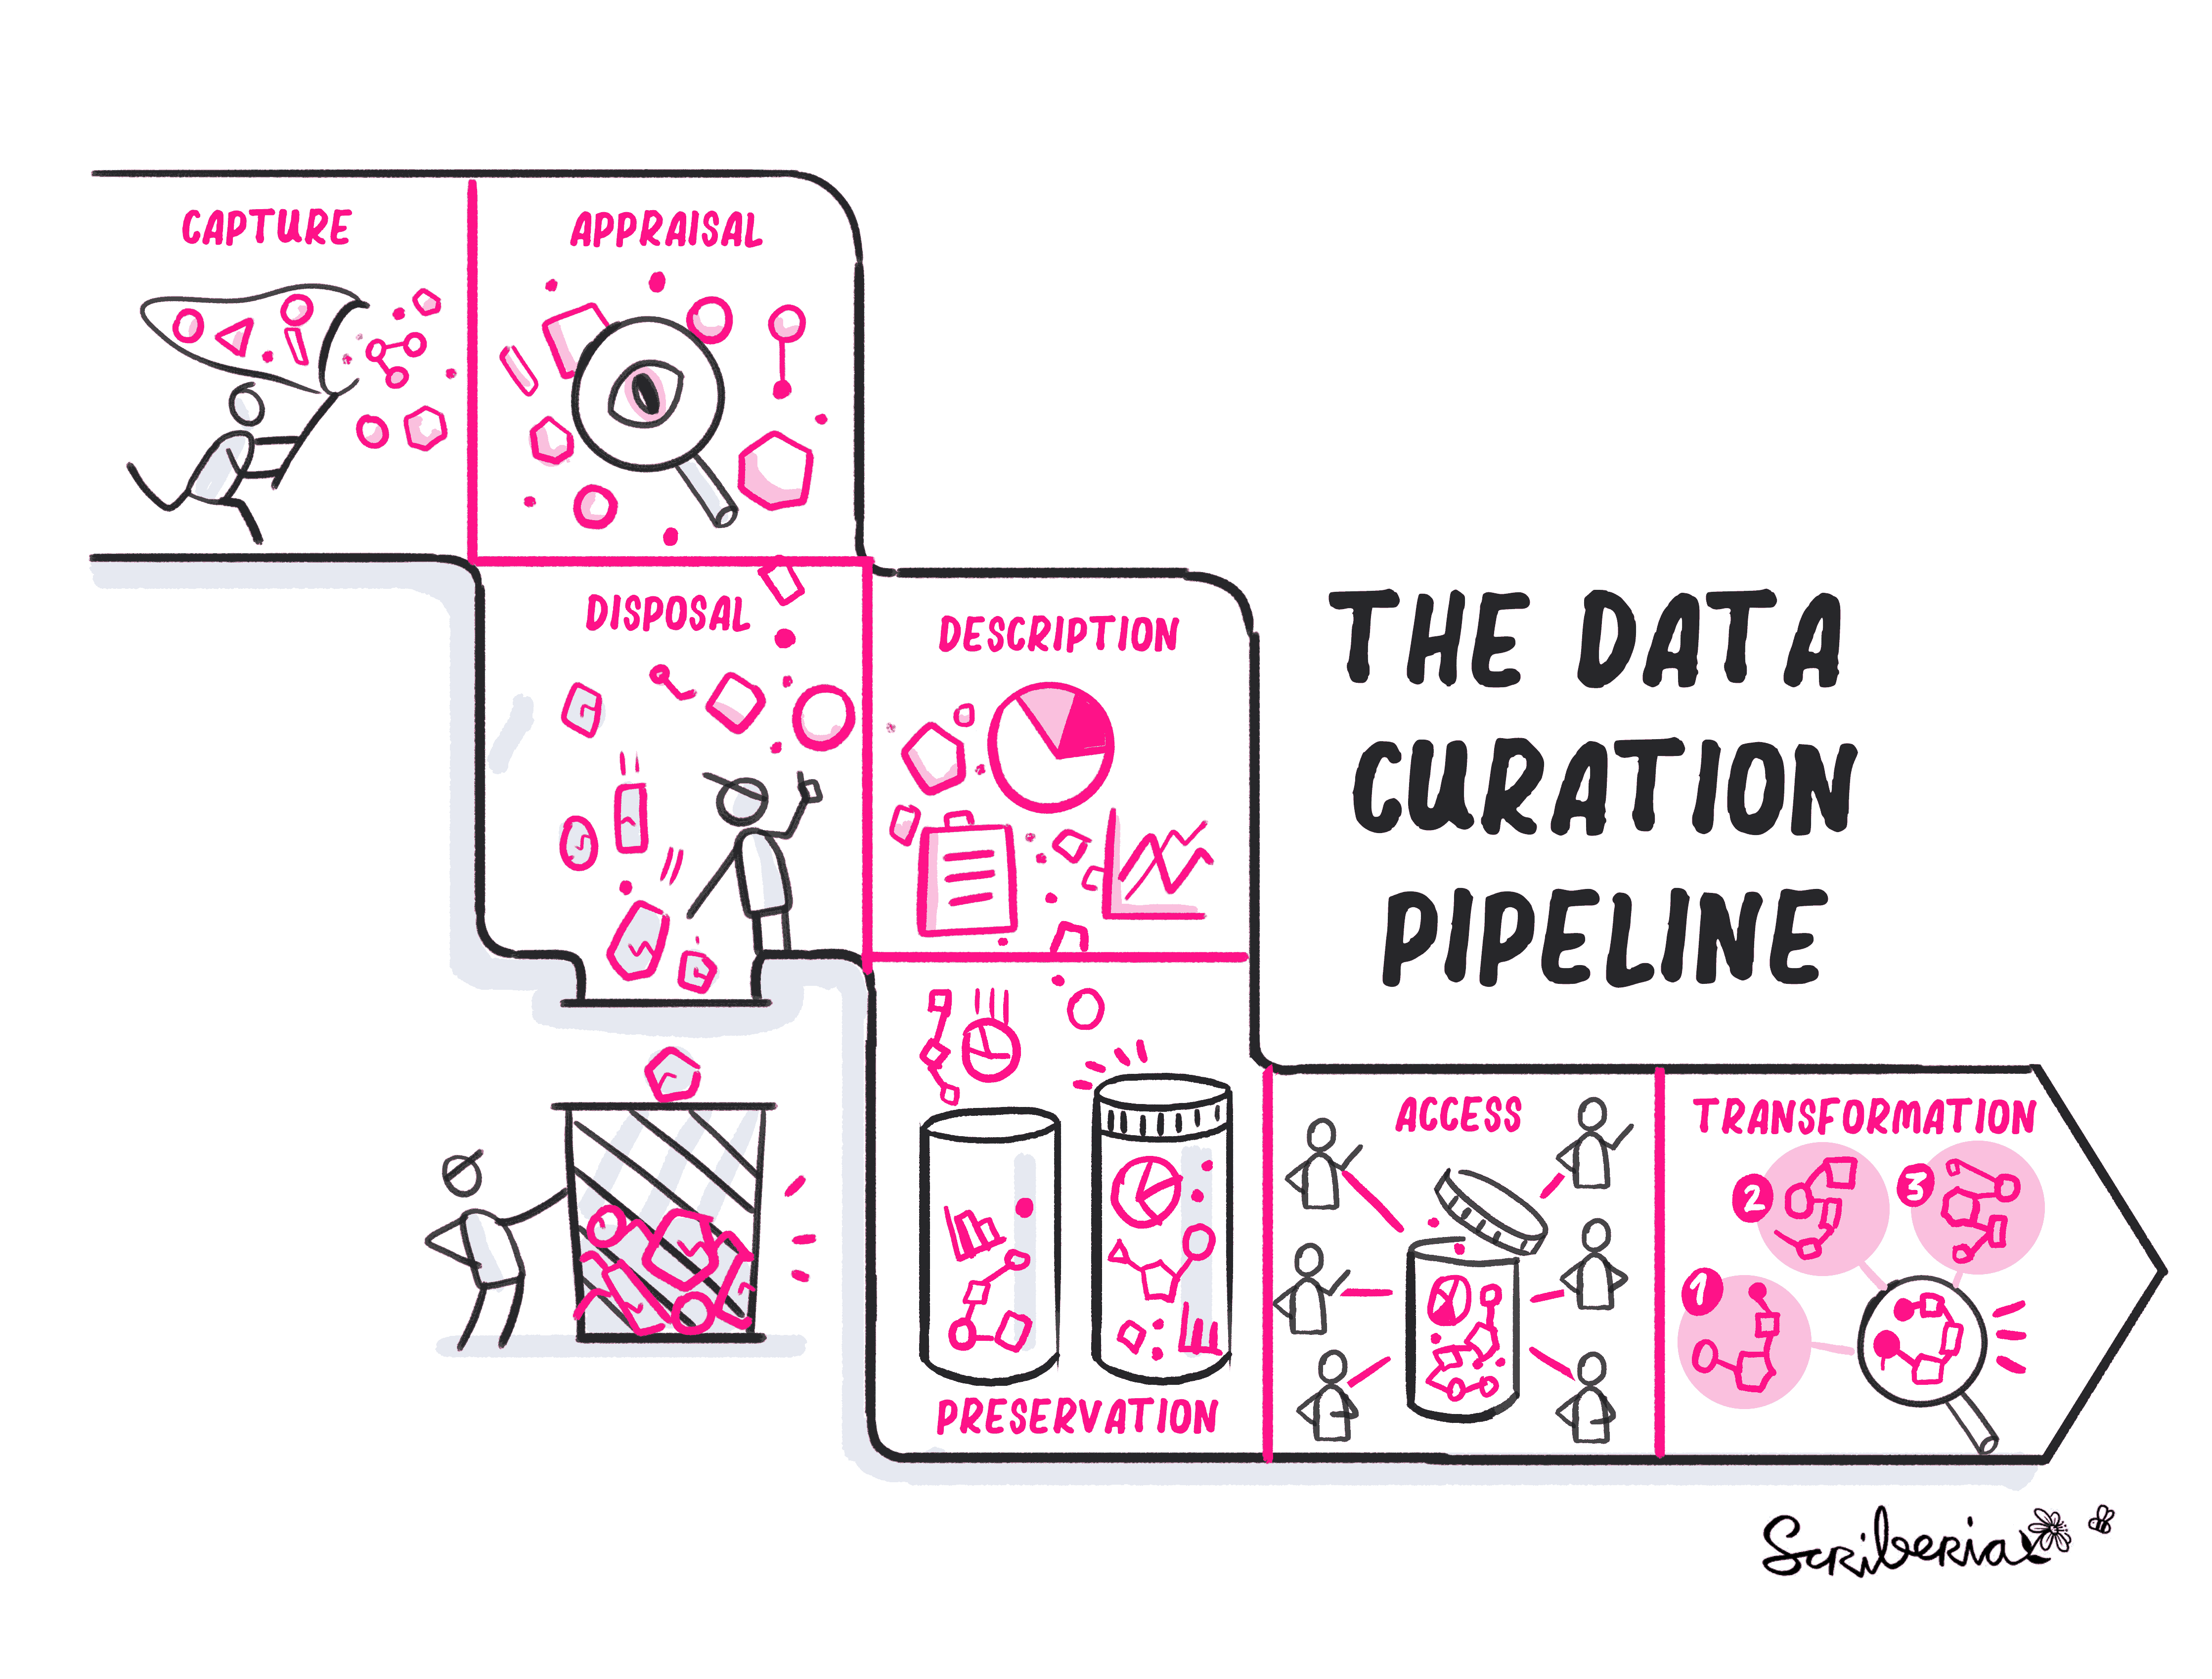 A cartoon illustration describing the seven steps outlined below of the Data Curation Pipeline. The first step is capture, where a person is trying to catch some bugs. The second one is appraisal, where there is a looking glass trying to review the data. The third one is disposal, where some trash is being tossed out of the pipeline. The fourth step is description, which is showing some data charts. The fifth step is preservation, where these charts are then stored in glass jars. The sixth step is access, where individuals would have access to these jars with data in them. The last step is transformation, where different datasets are being transformed into a new one.